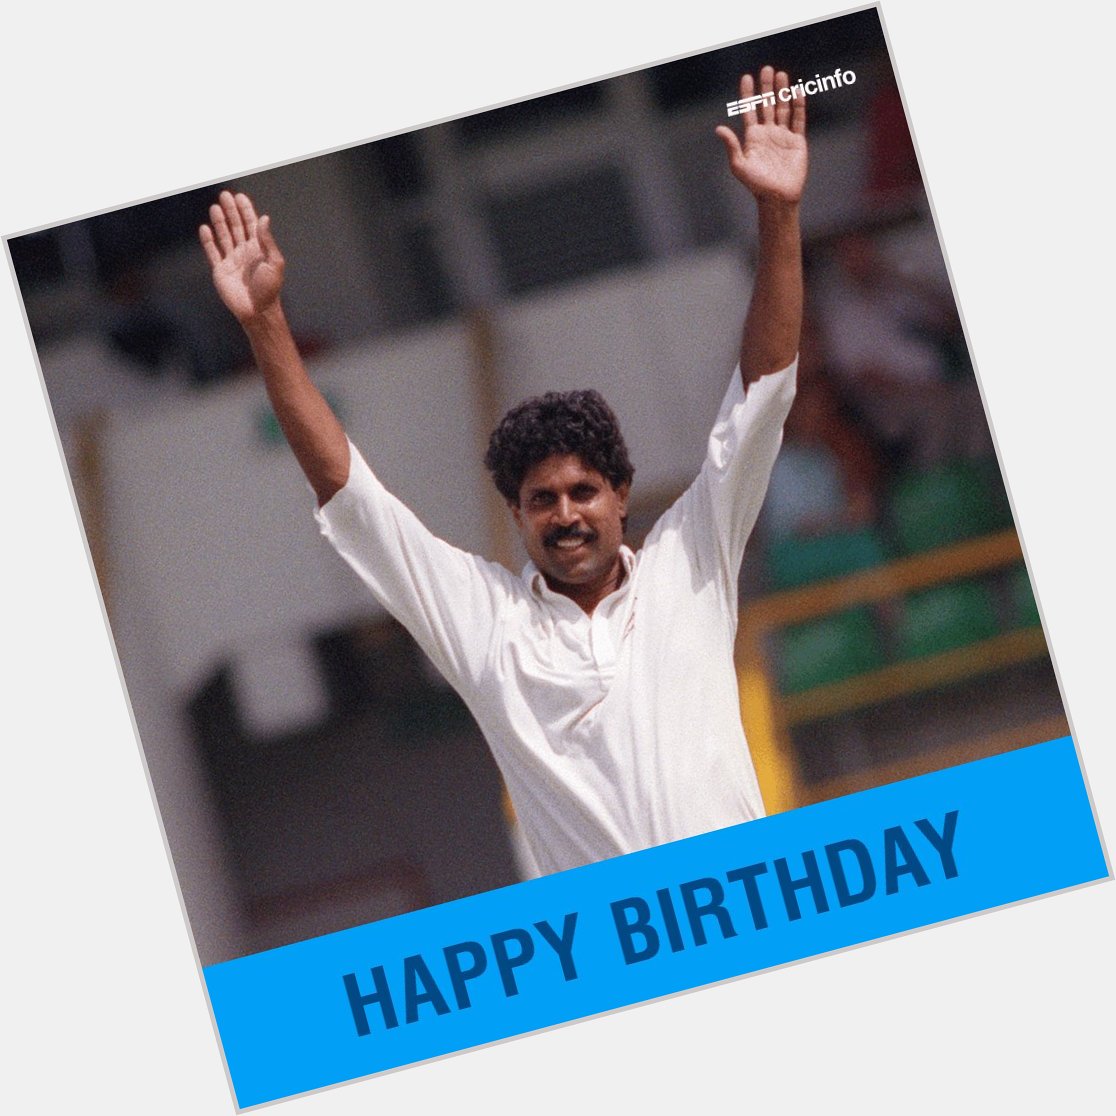 Wish you a very happy birthday Kapil Dev sir. You are real hero of Indian Cricket. 